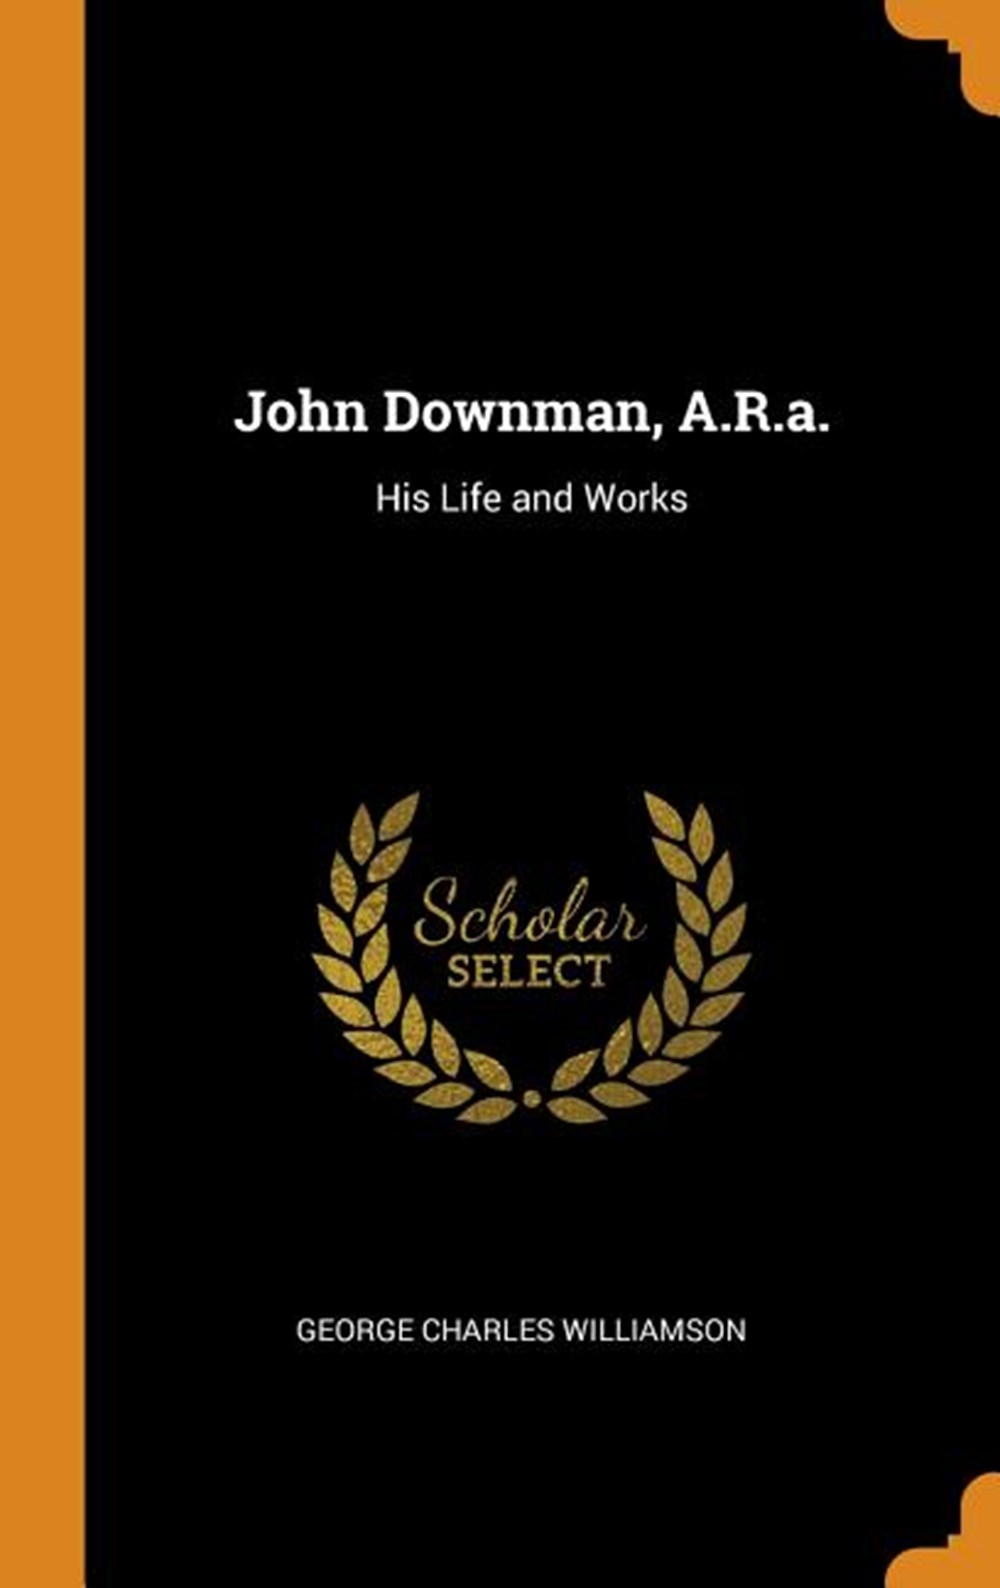 John Downman, A.R.A.: His Life and Works